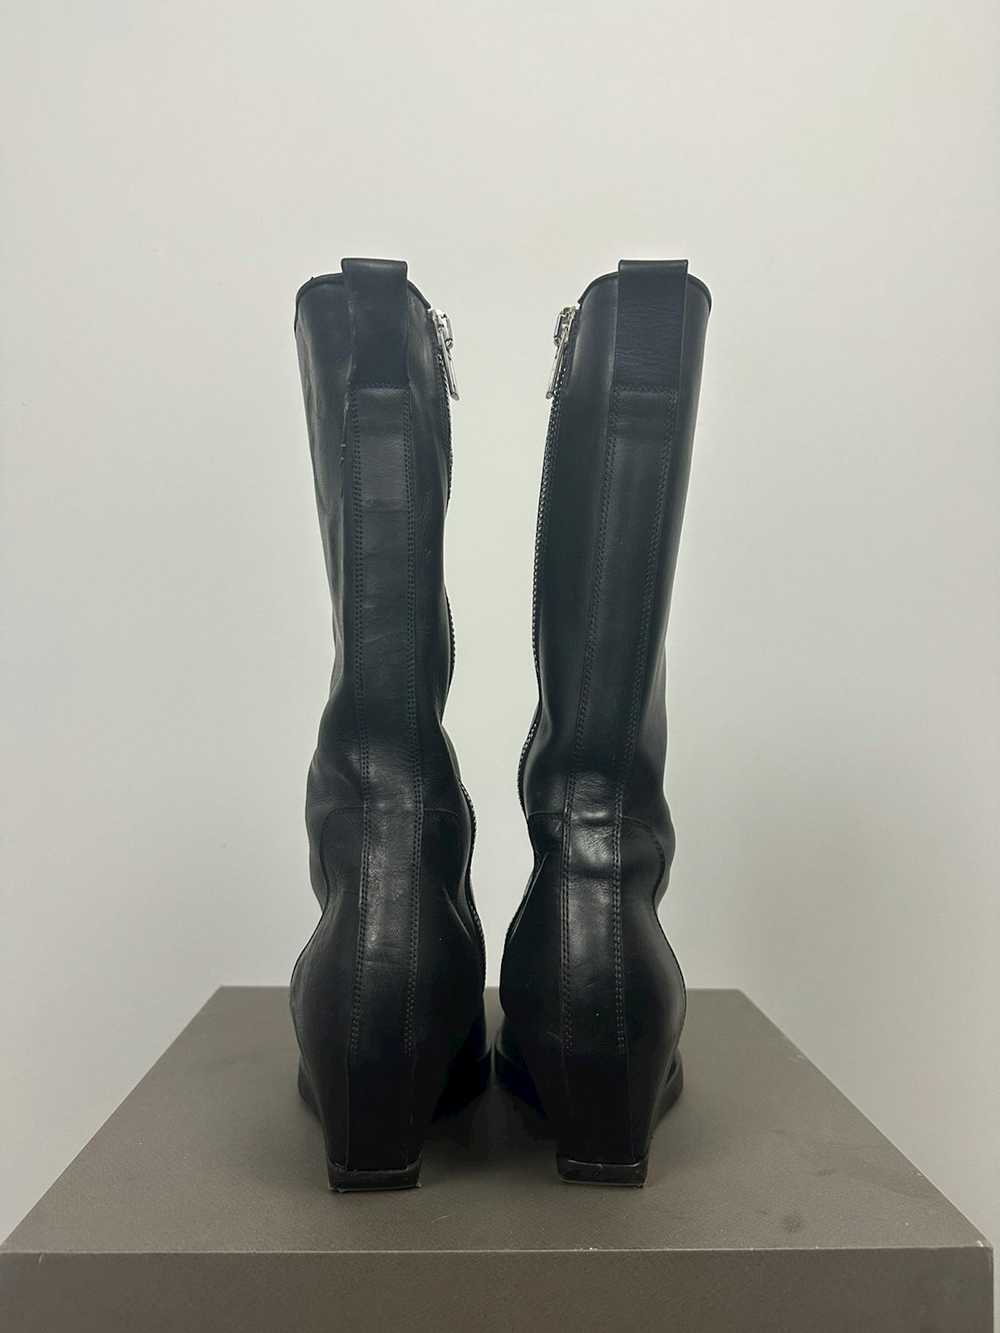 Rick Owens SS19 ‘BABEL’ Square Toe Wedge Boots - image 4